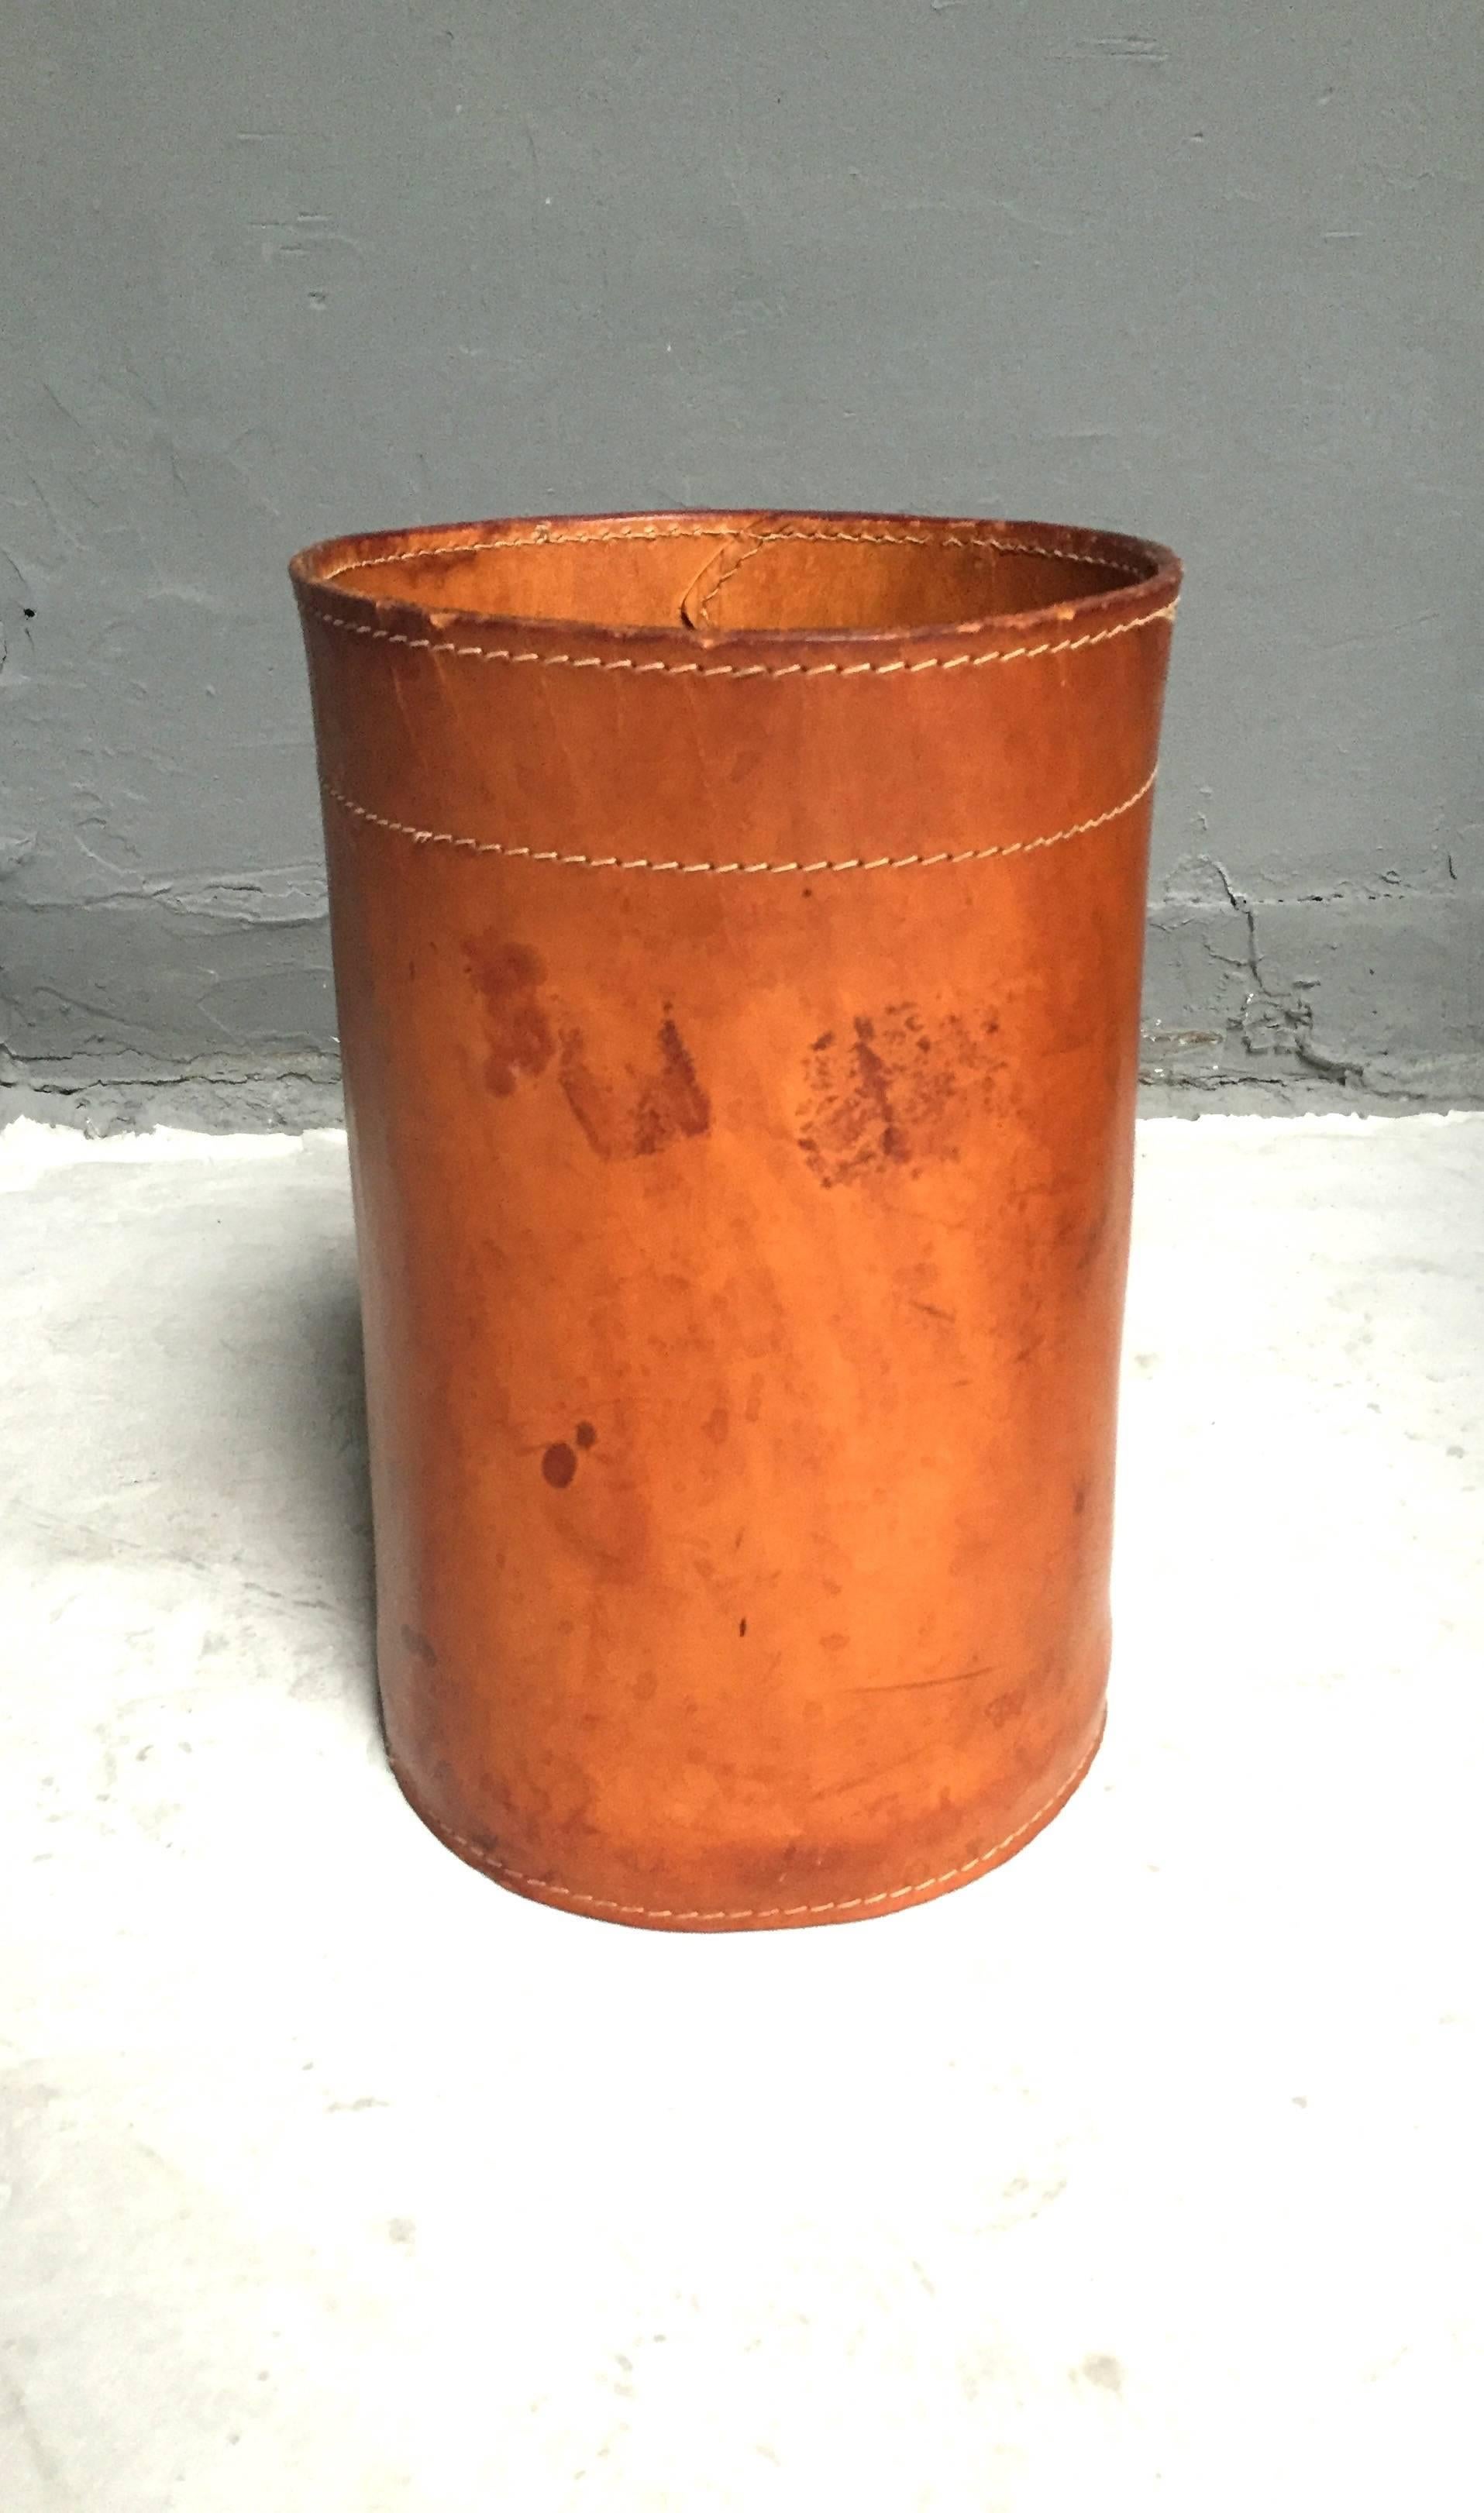 Handsome leather bin in the style of Jacques Adnet. Gorgeous patina to saddle leather. Fantastic piece!